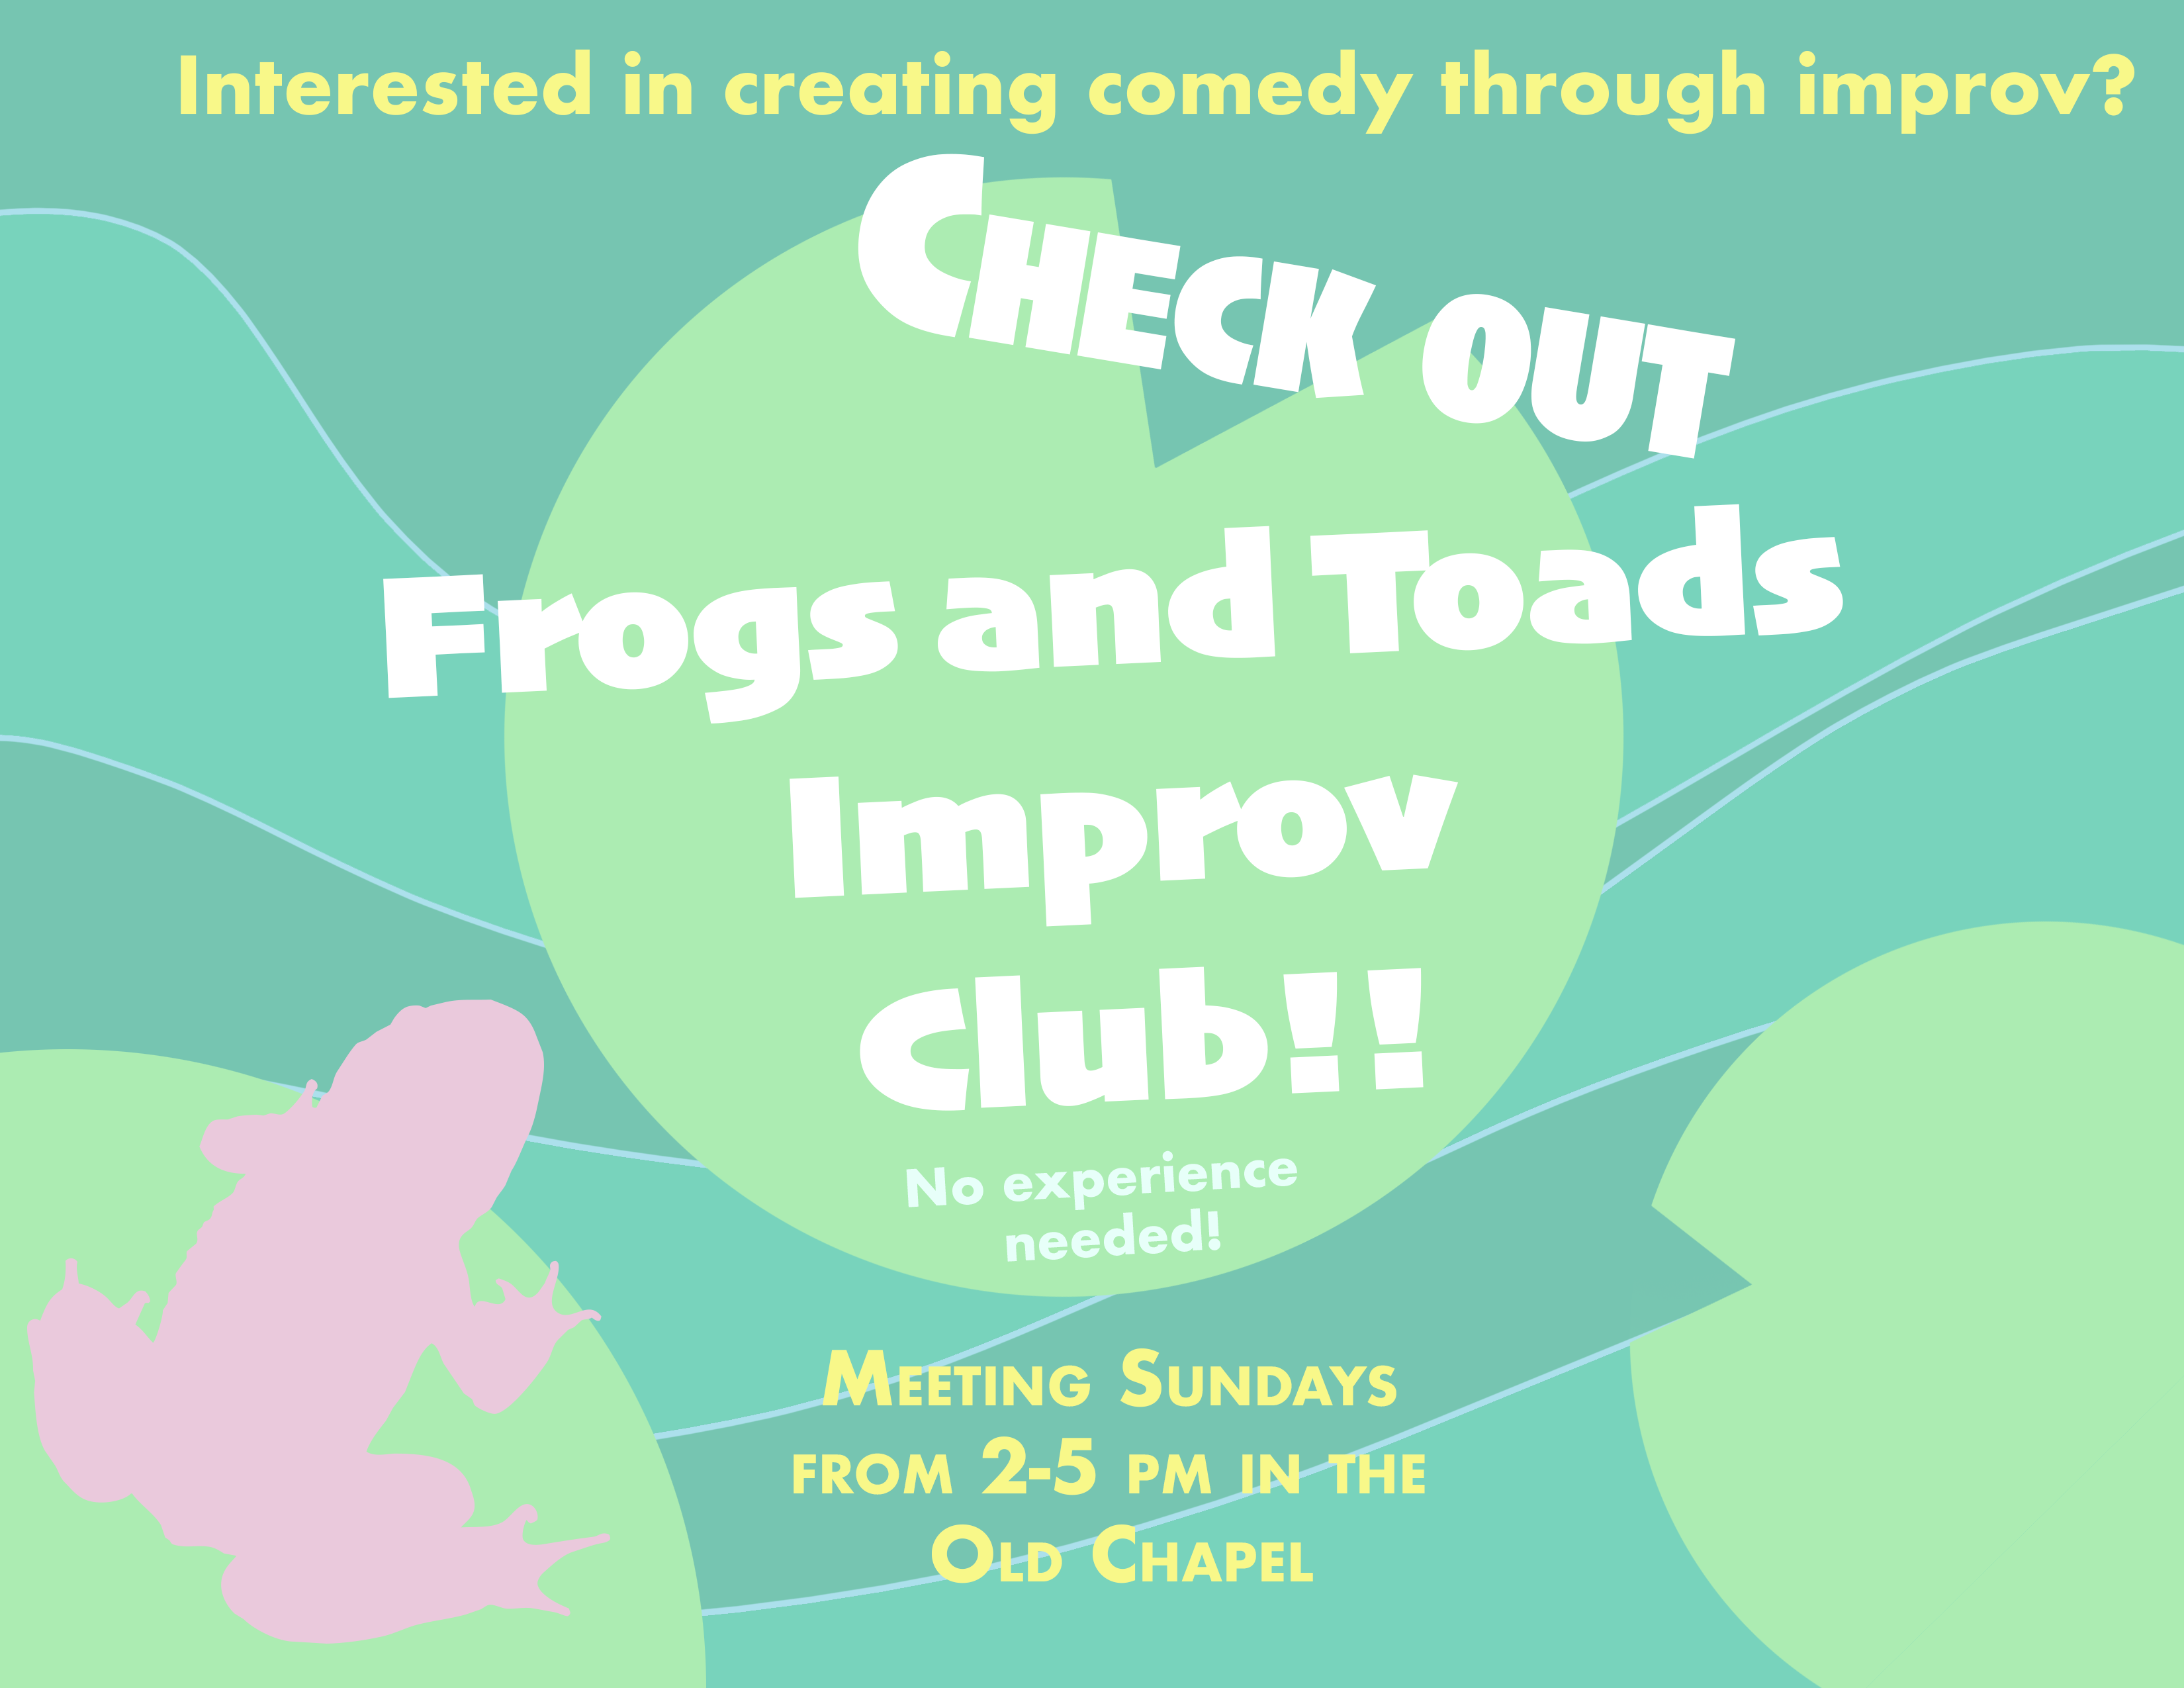 Frogs and Toad Improv Club!!